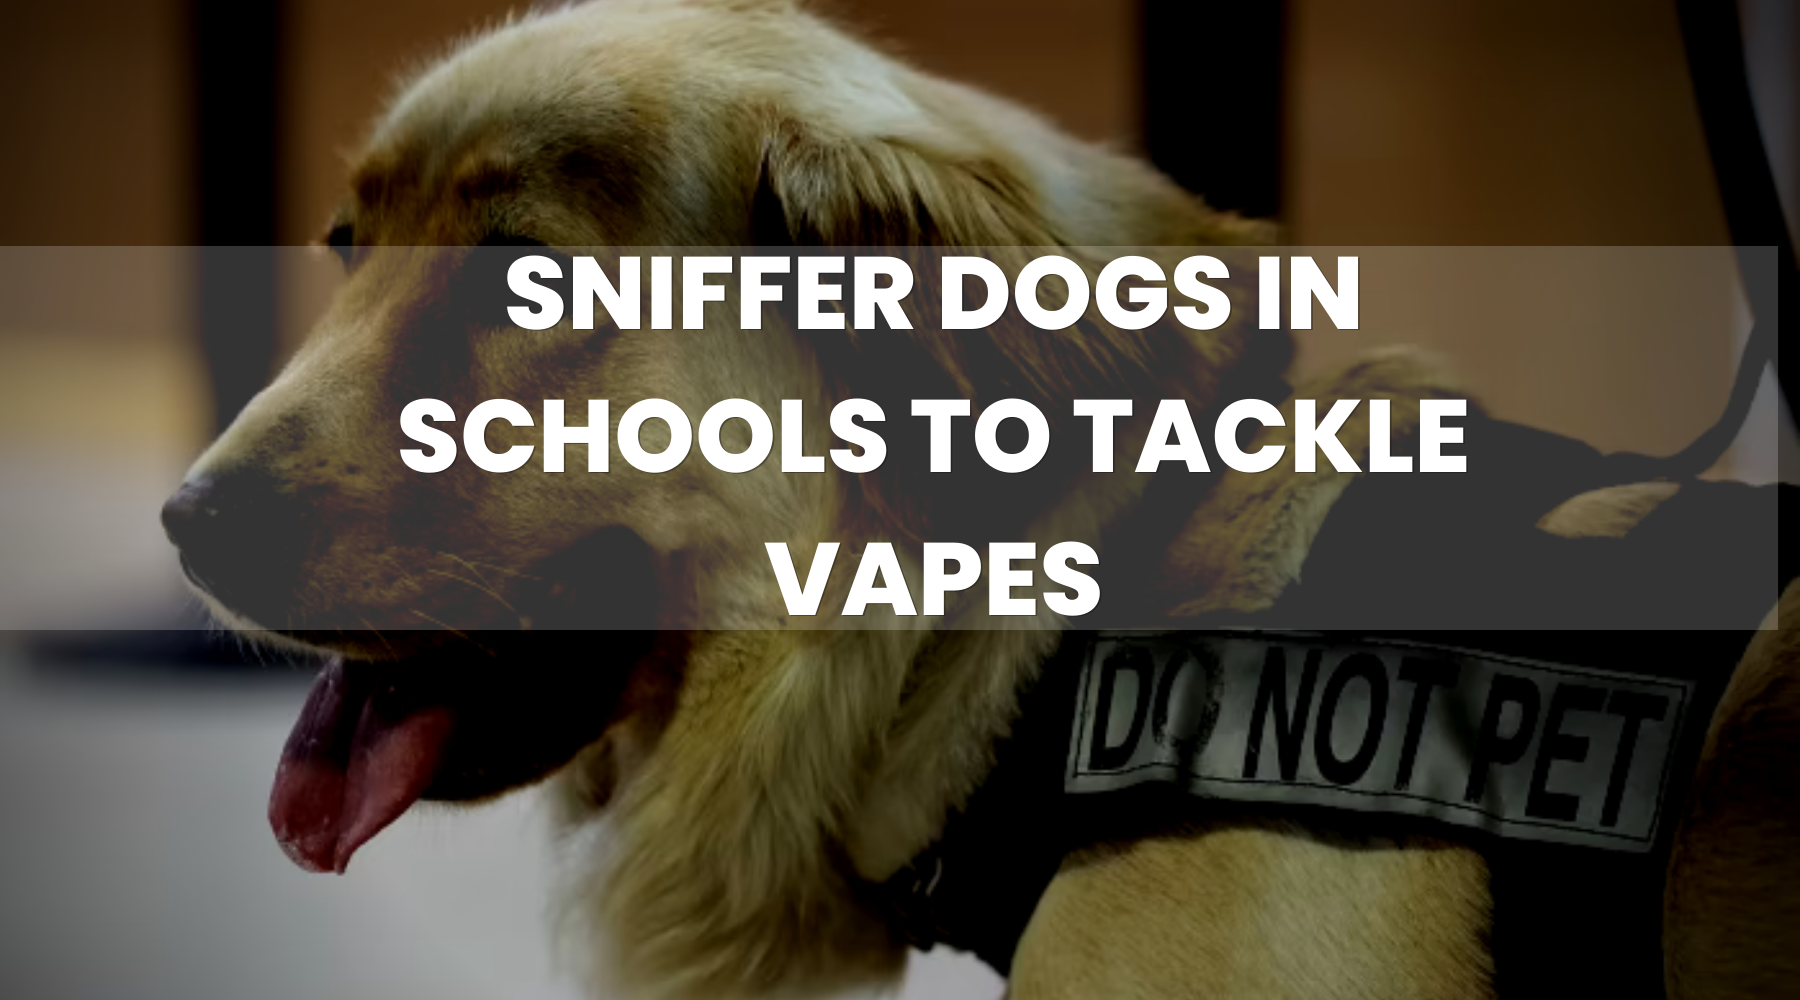 City of Norwich School to Call in Sniffer Dogs to Tackle Vapes